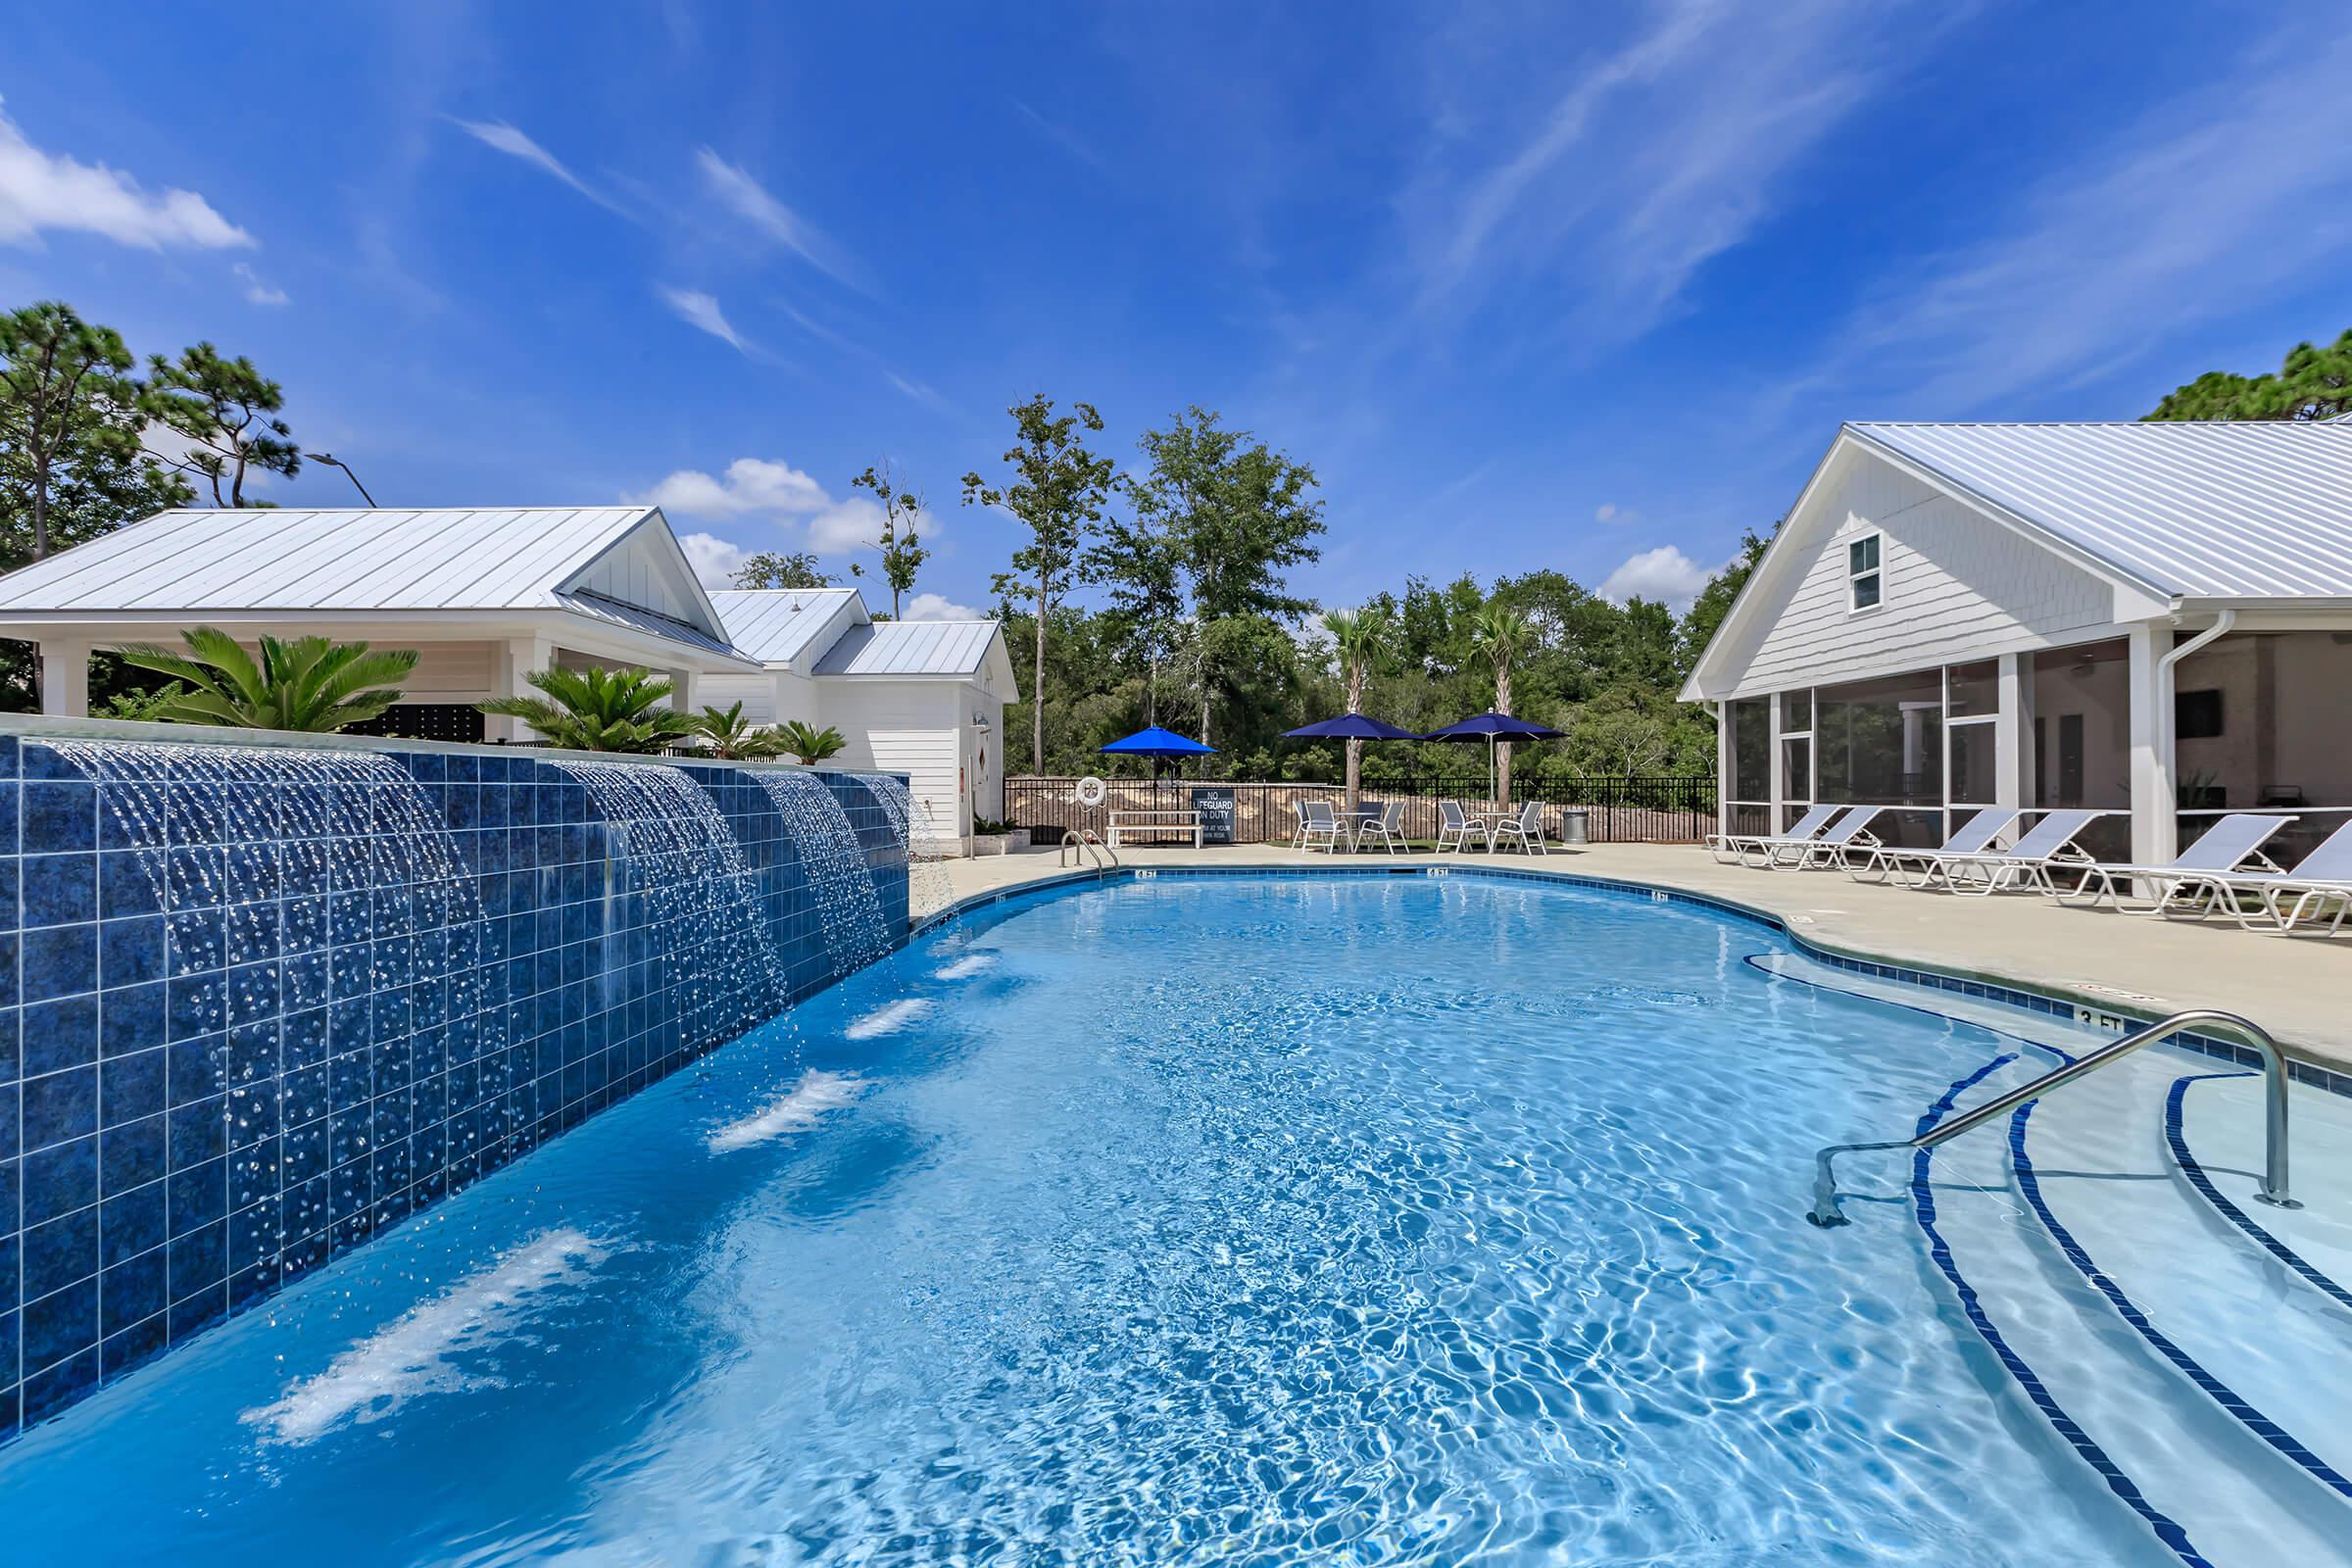 Enjoy the shimmering swimming pool at The Townhomes at Beau Rivage in Wilmington, North Carolina.